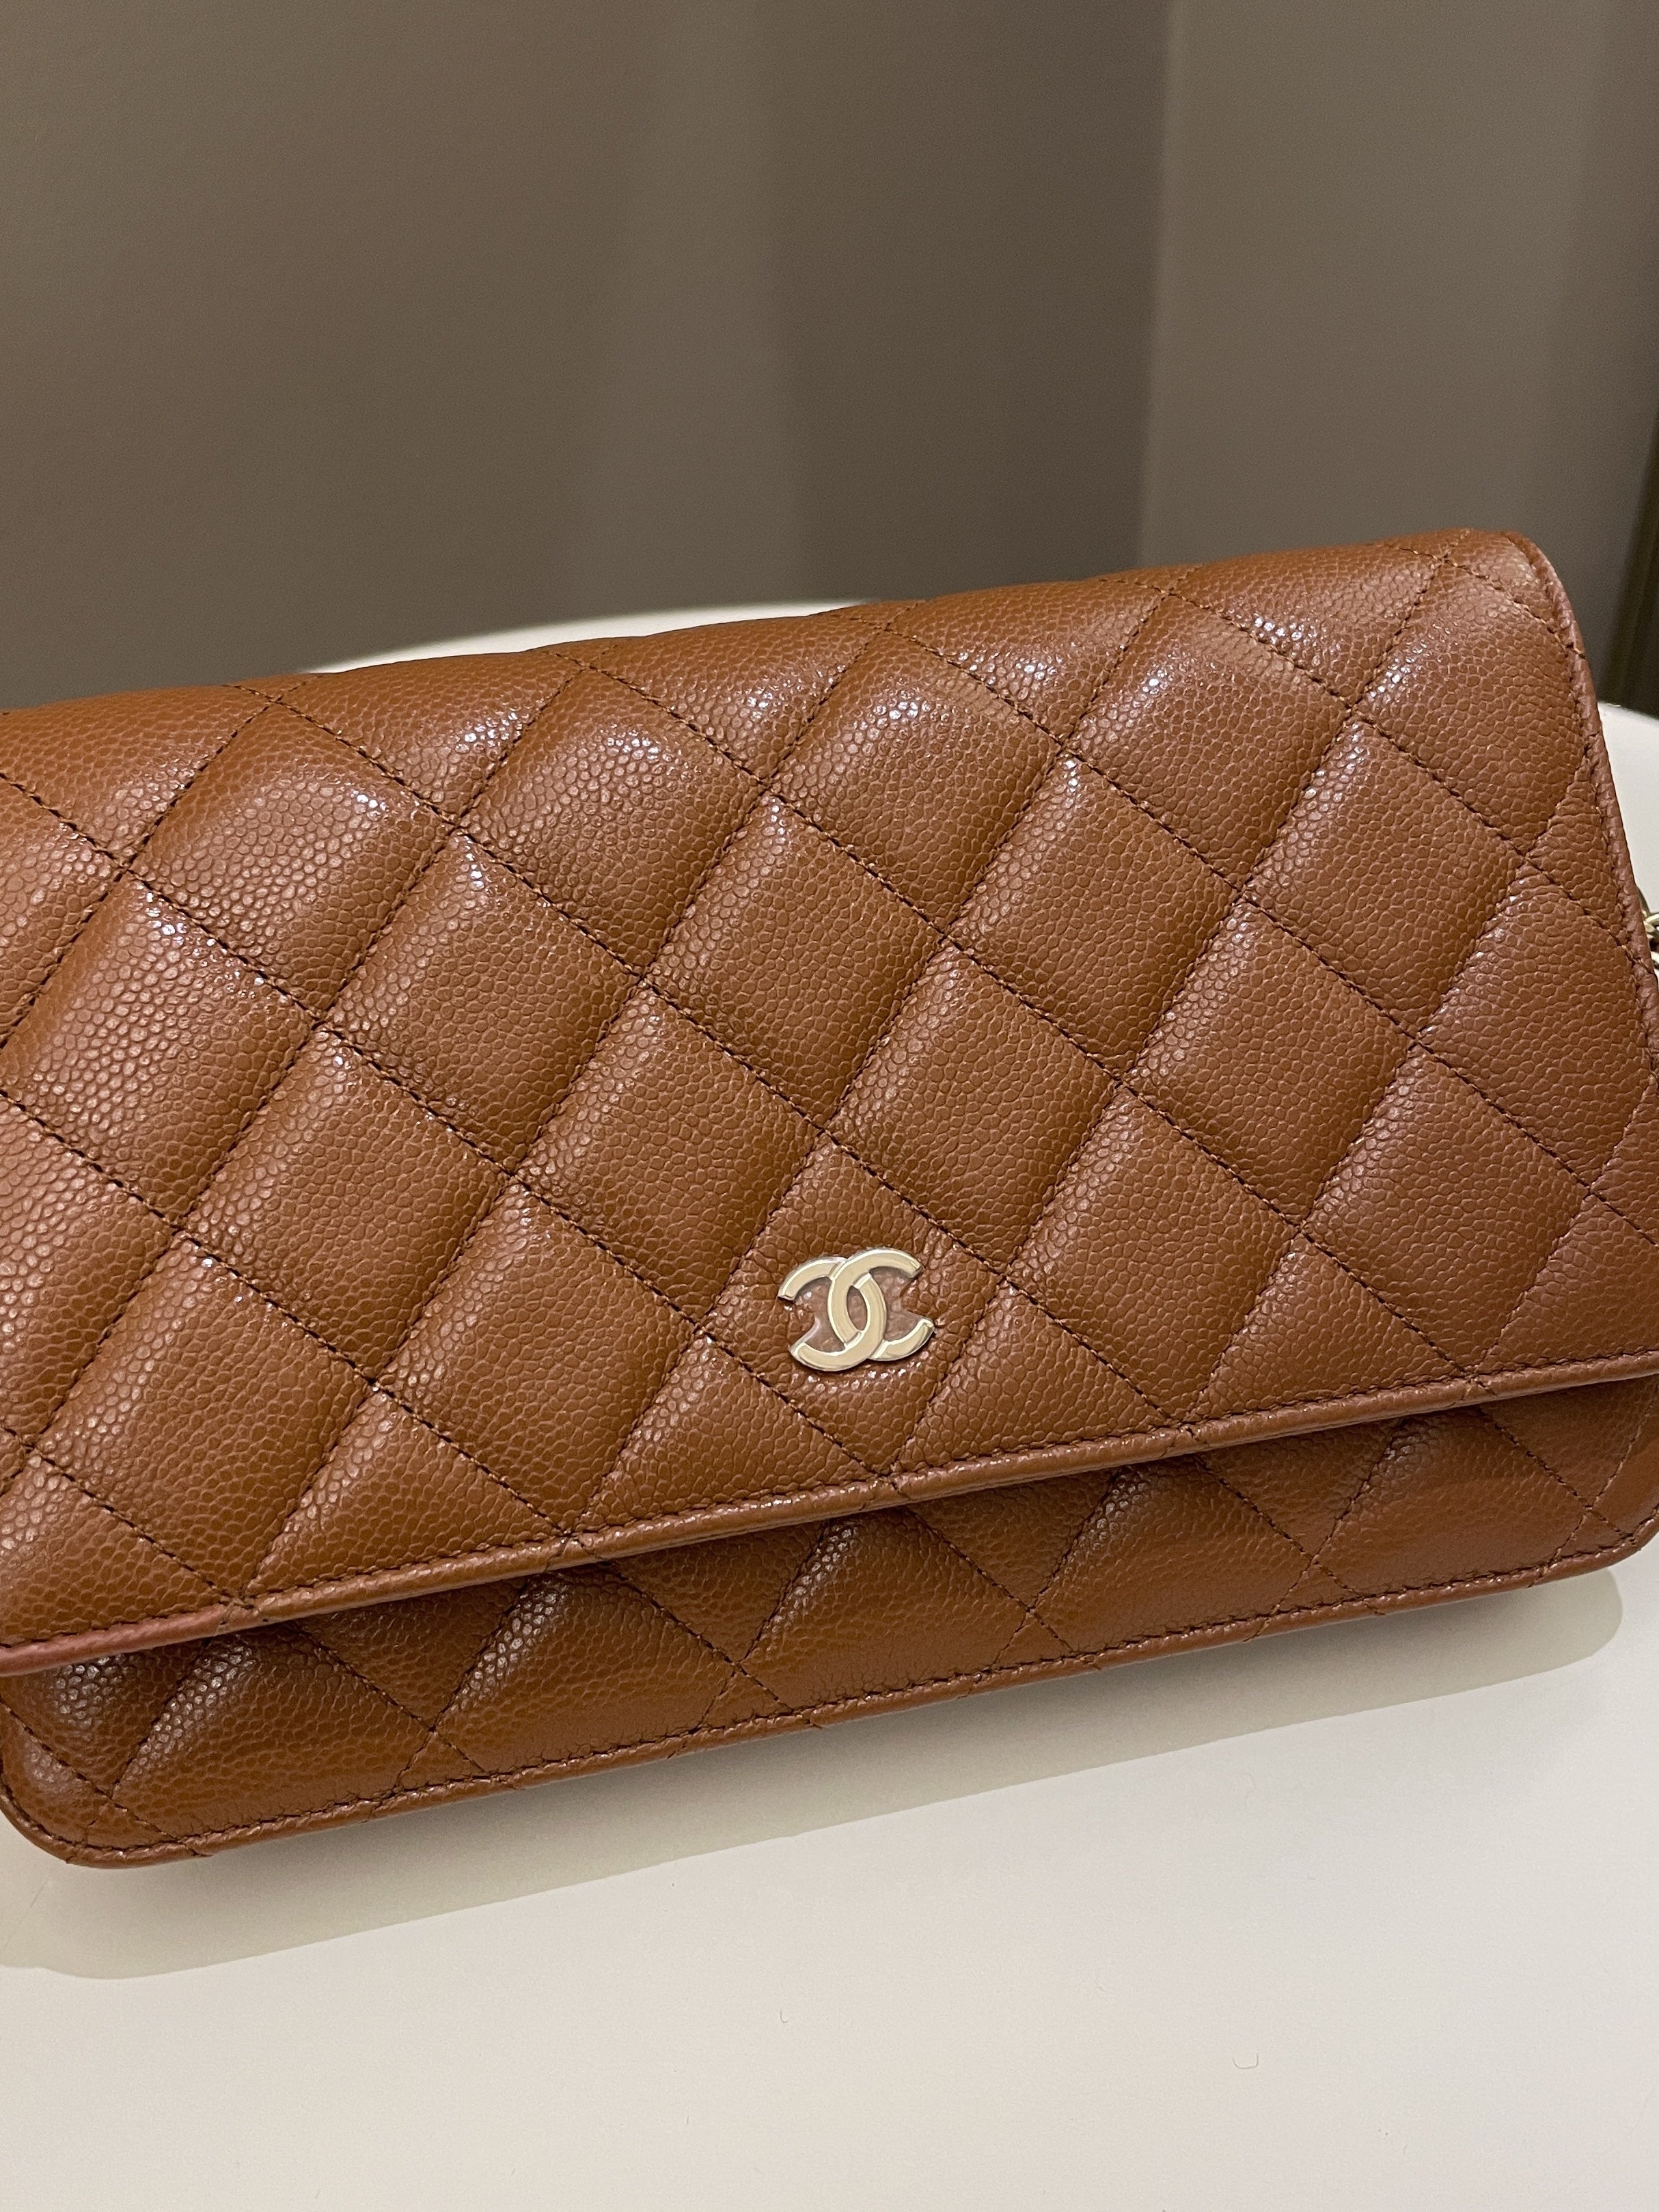 Chanel 23A Cc Quilted Wallet on Chain Tan Brown Caviar